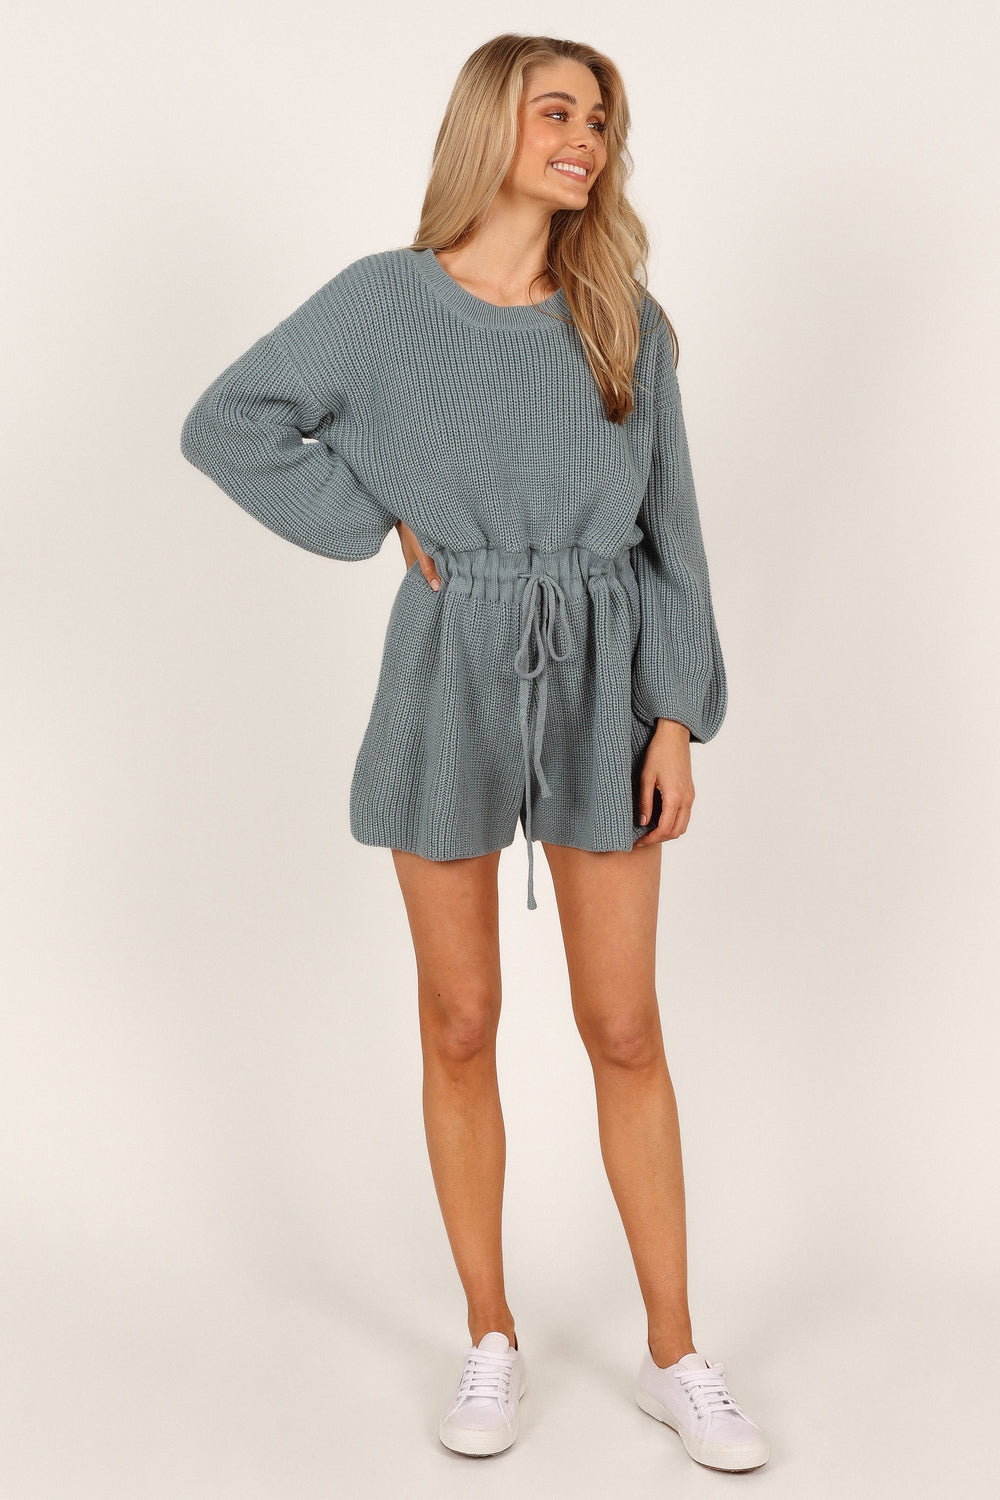 Petal and Pup USA Rompers Sloane Sweater Romper - Dusty Blue